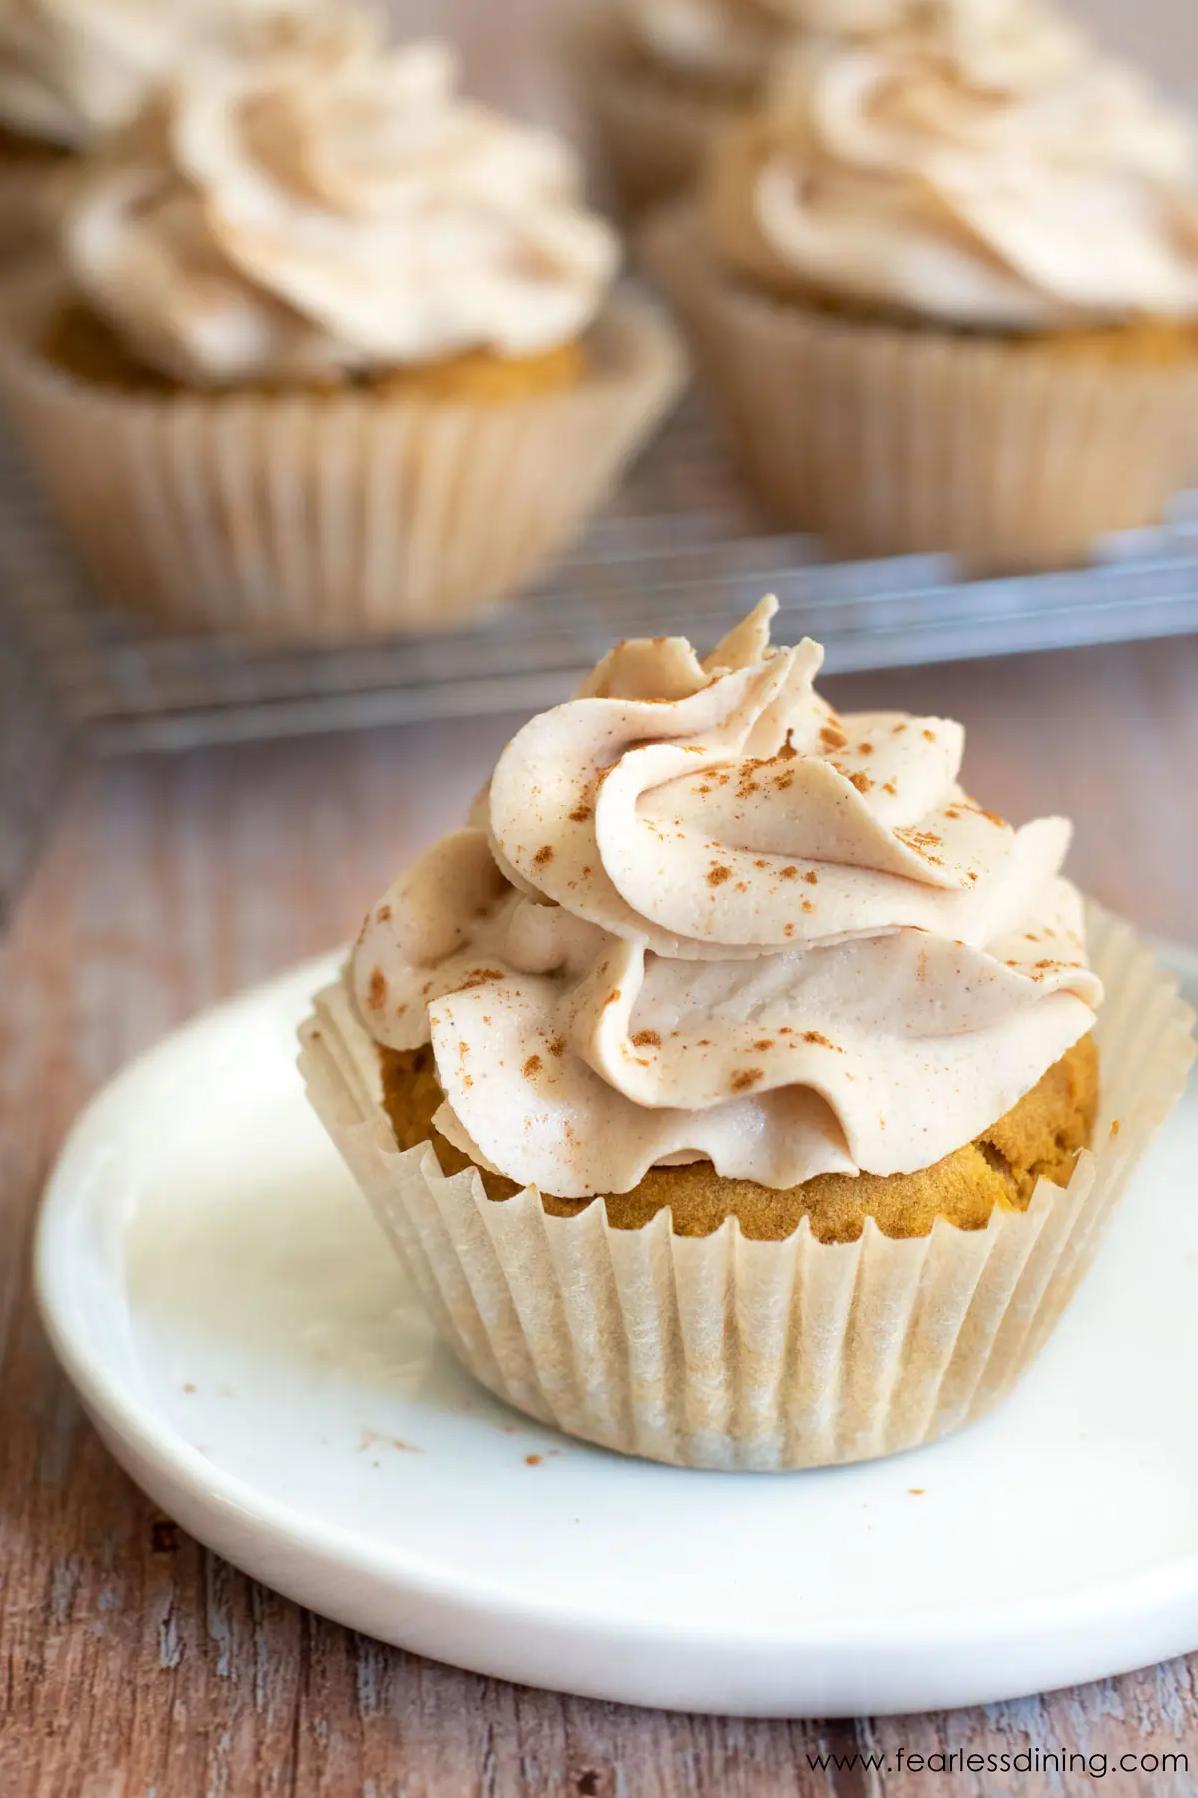  Indulge without the guilt; these mini cupcakes are made with all-natural ingredients.